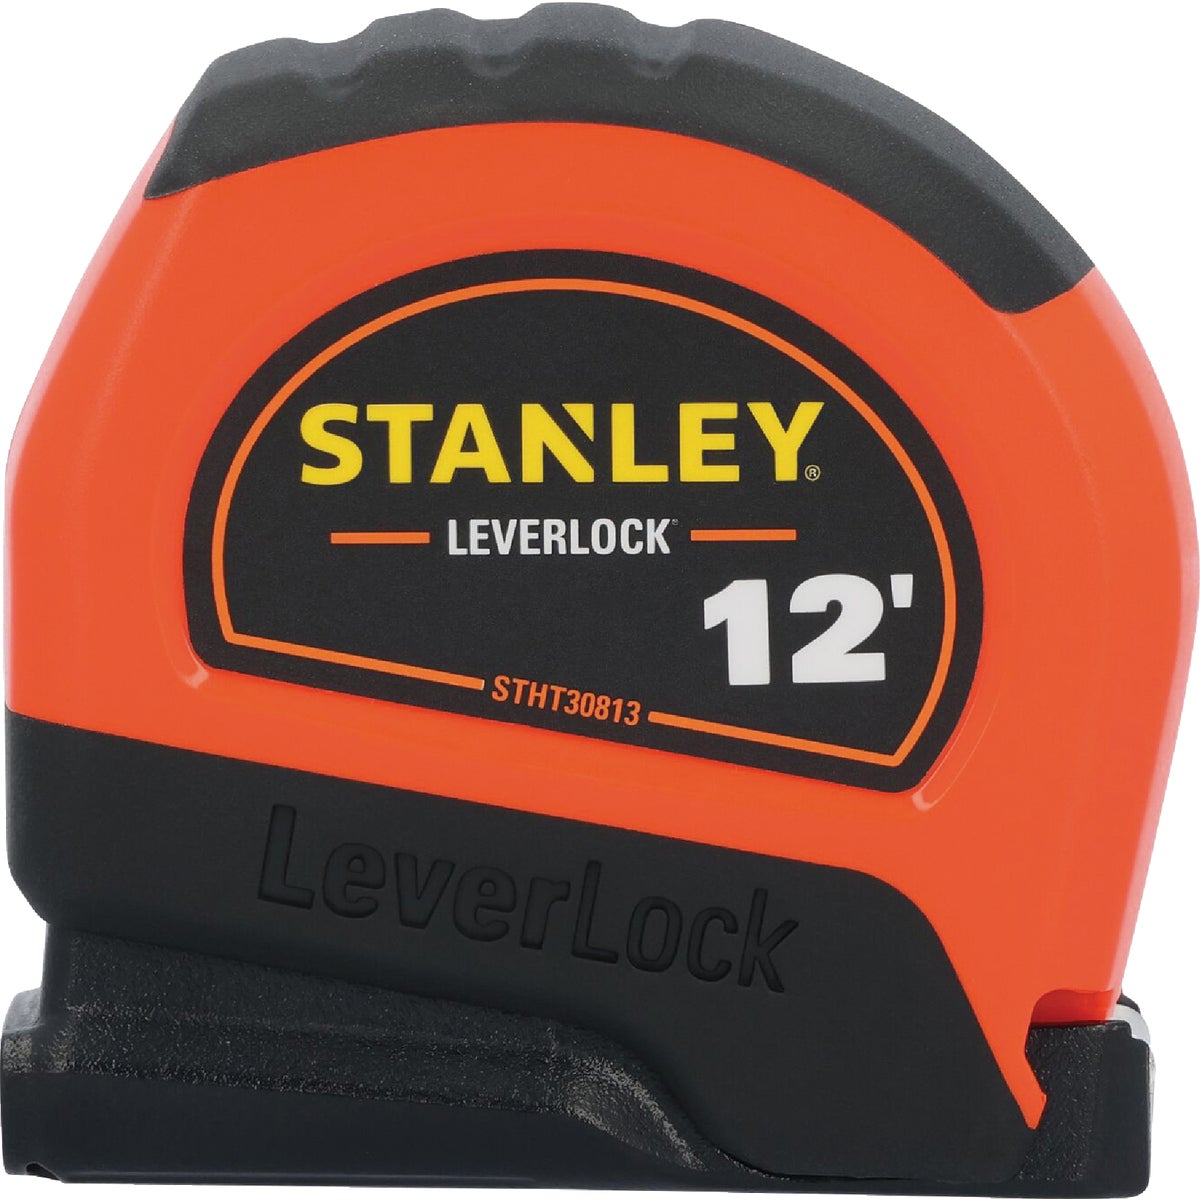 Item 341924, Get consistent, expert-level results with this High-Visibility LEVERLOCK 